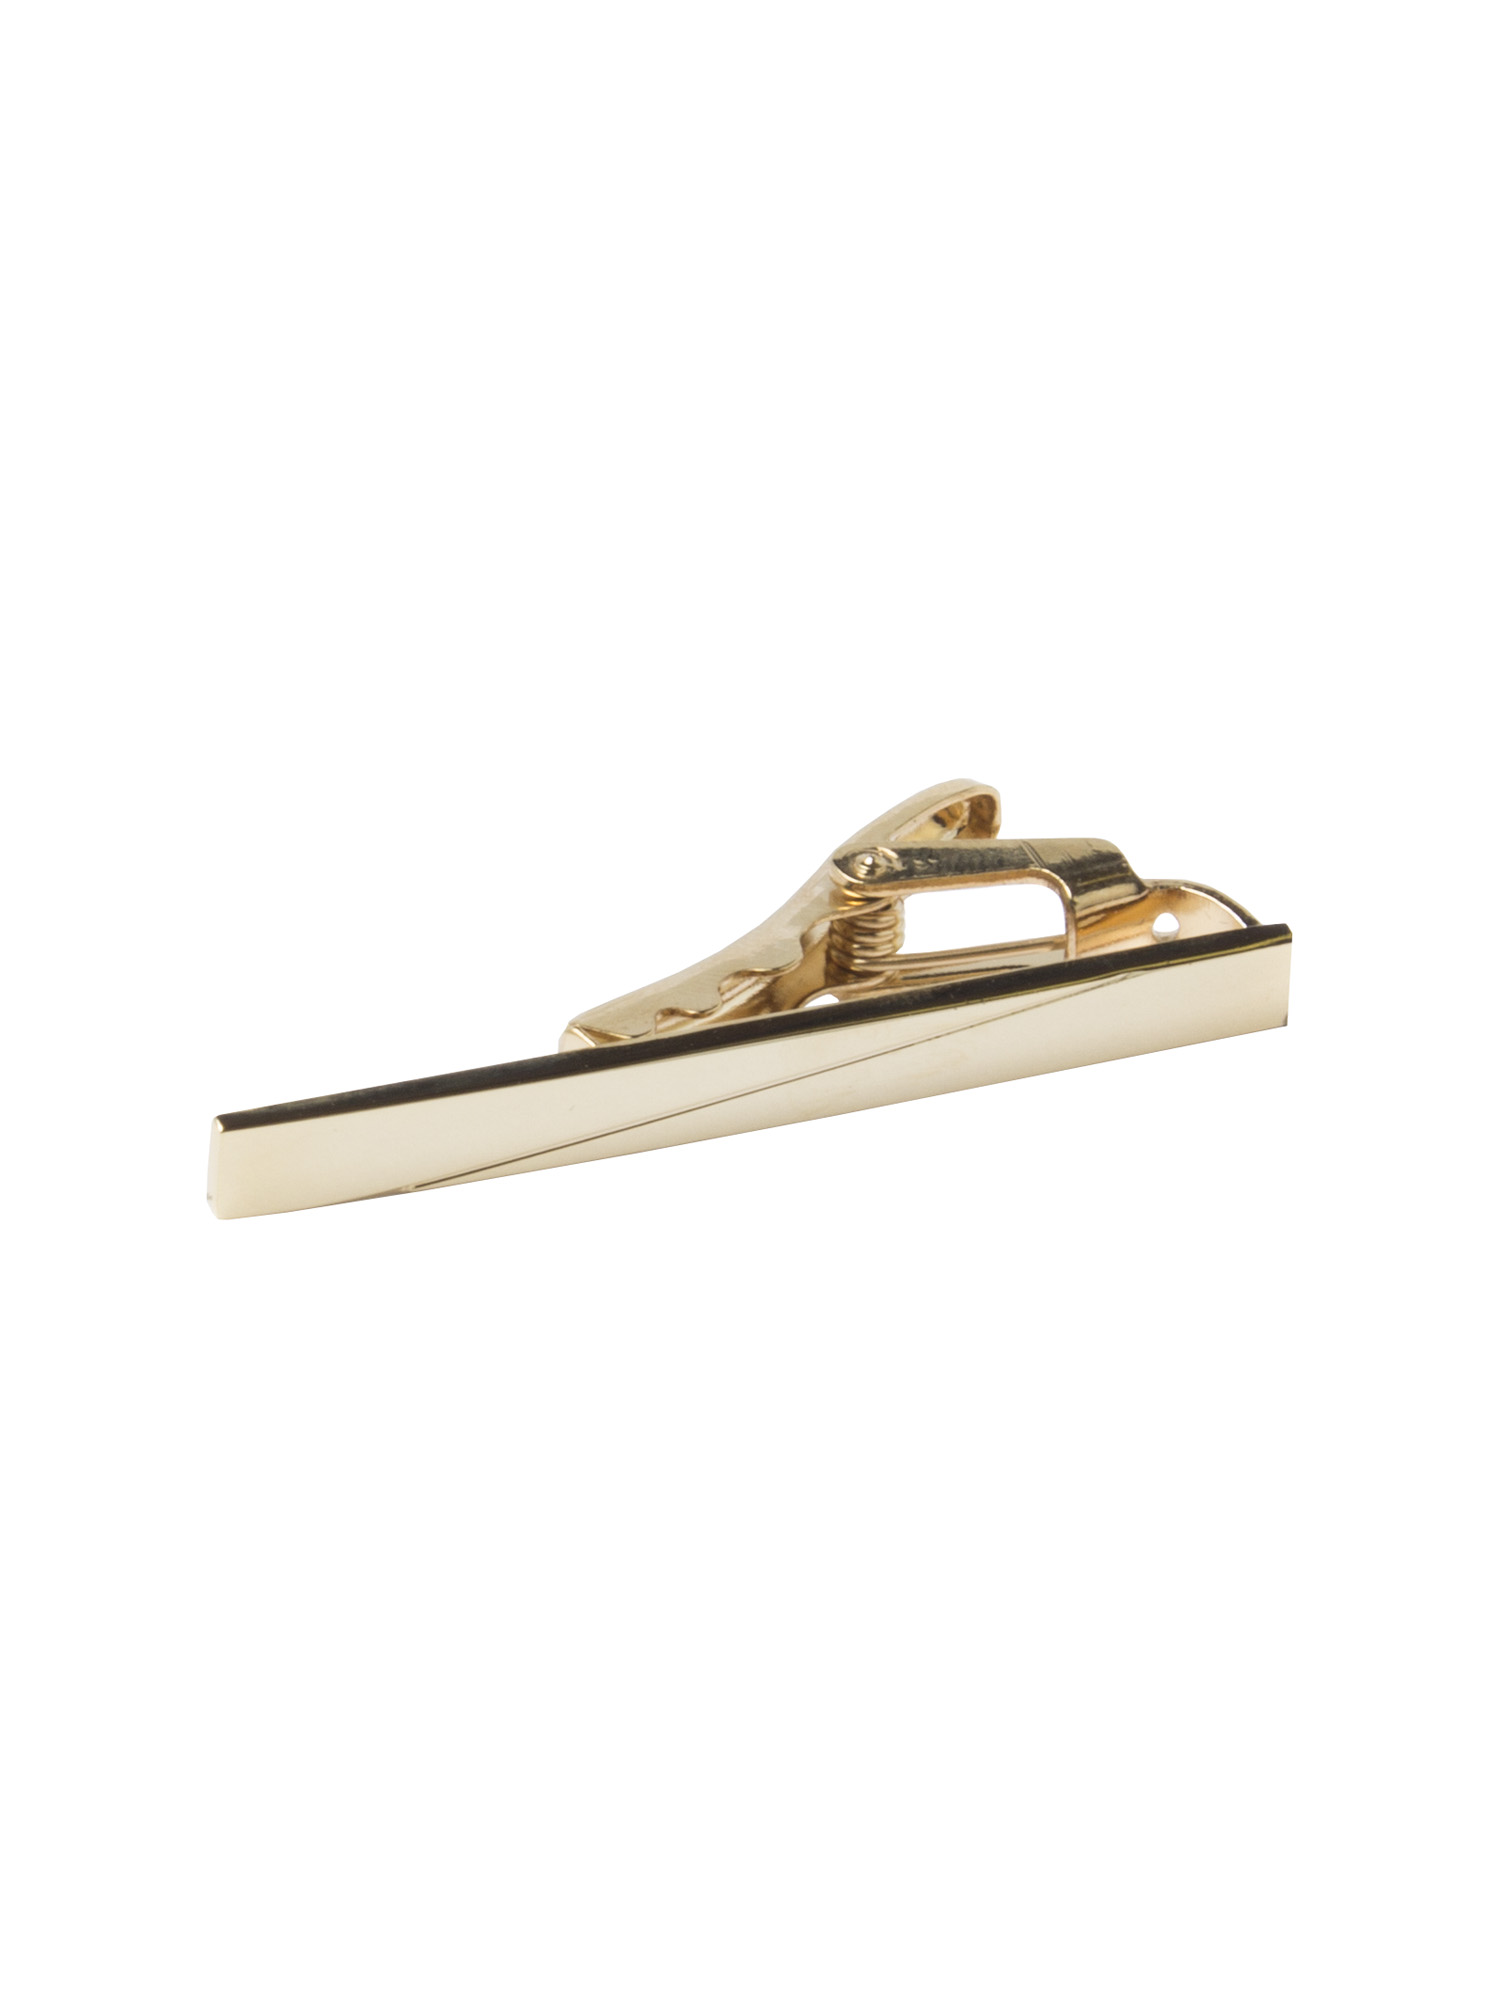 Gold Brushed Tie Bar - Accessories - Alexandre London